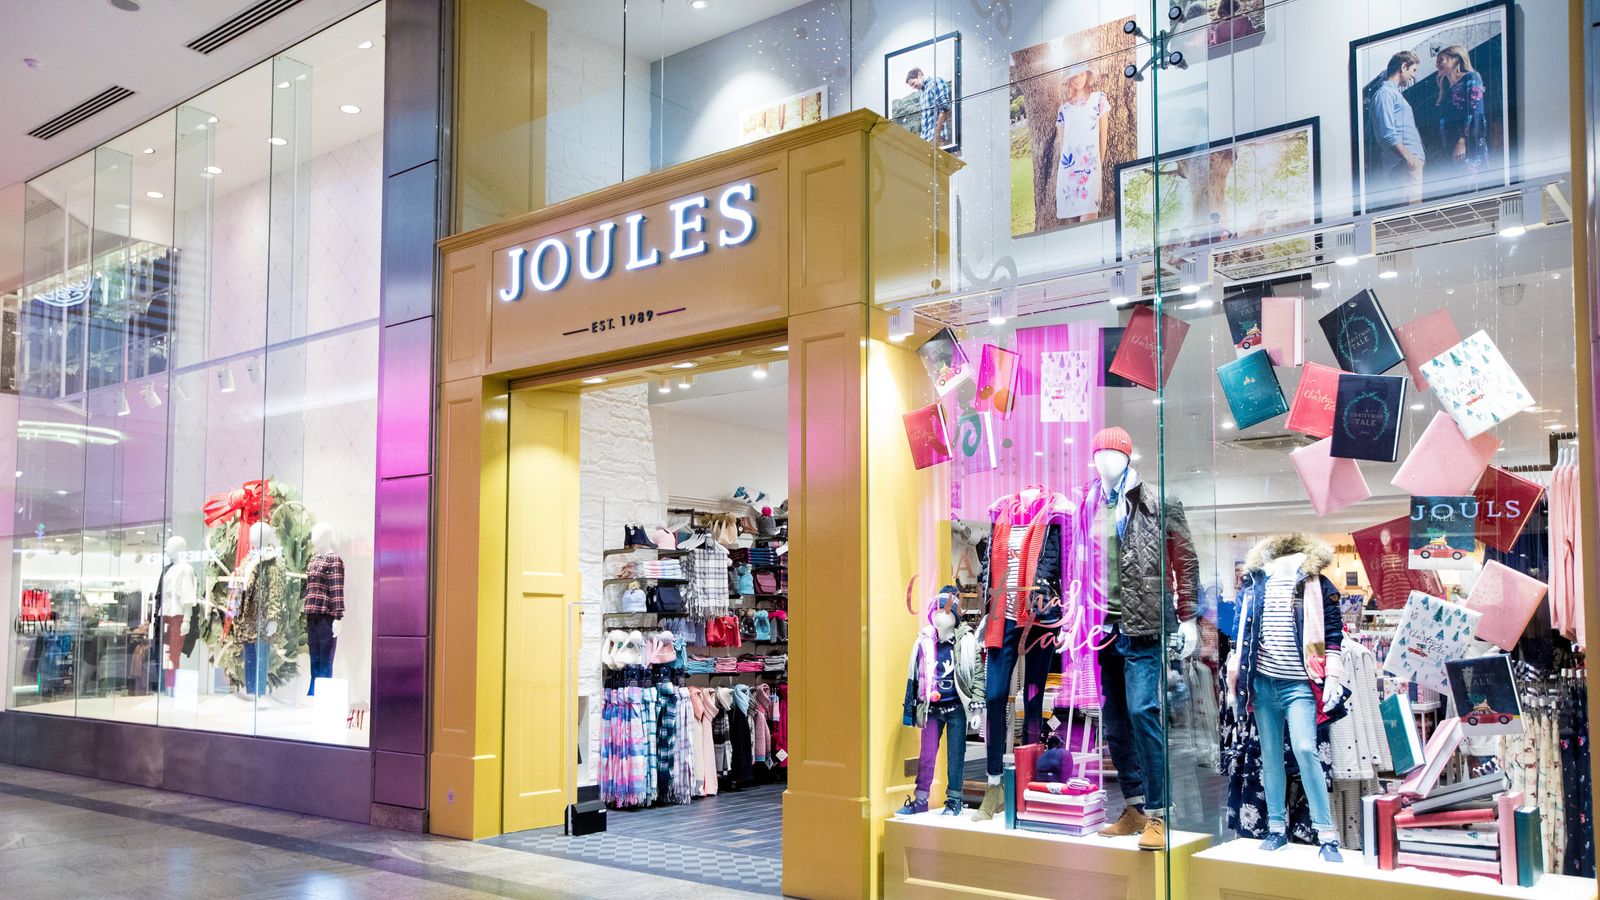 Joules and The Garden Trading Company on brink of collapse with 1,600 jobs at risk